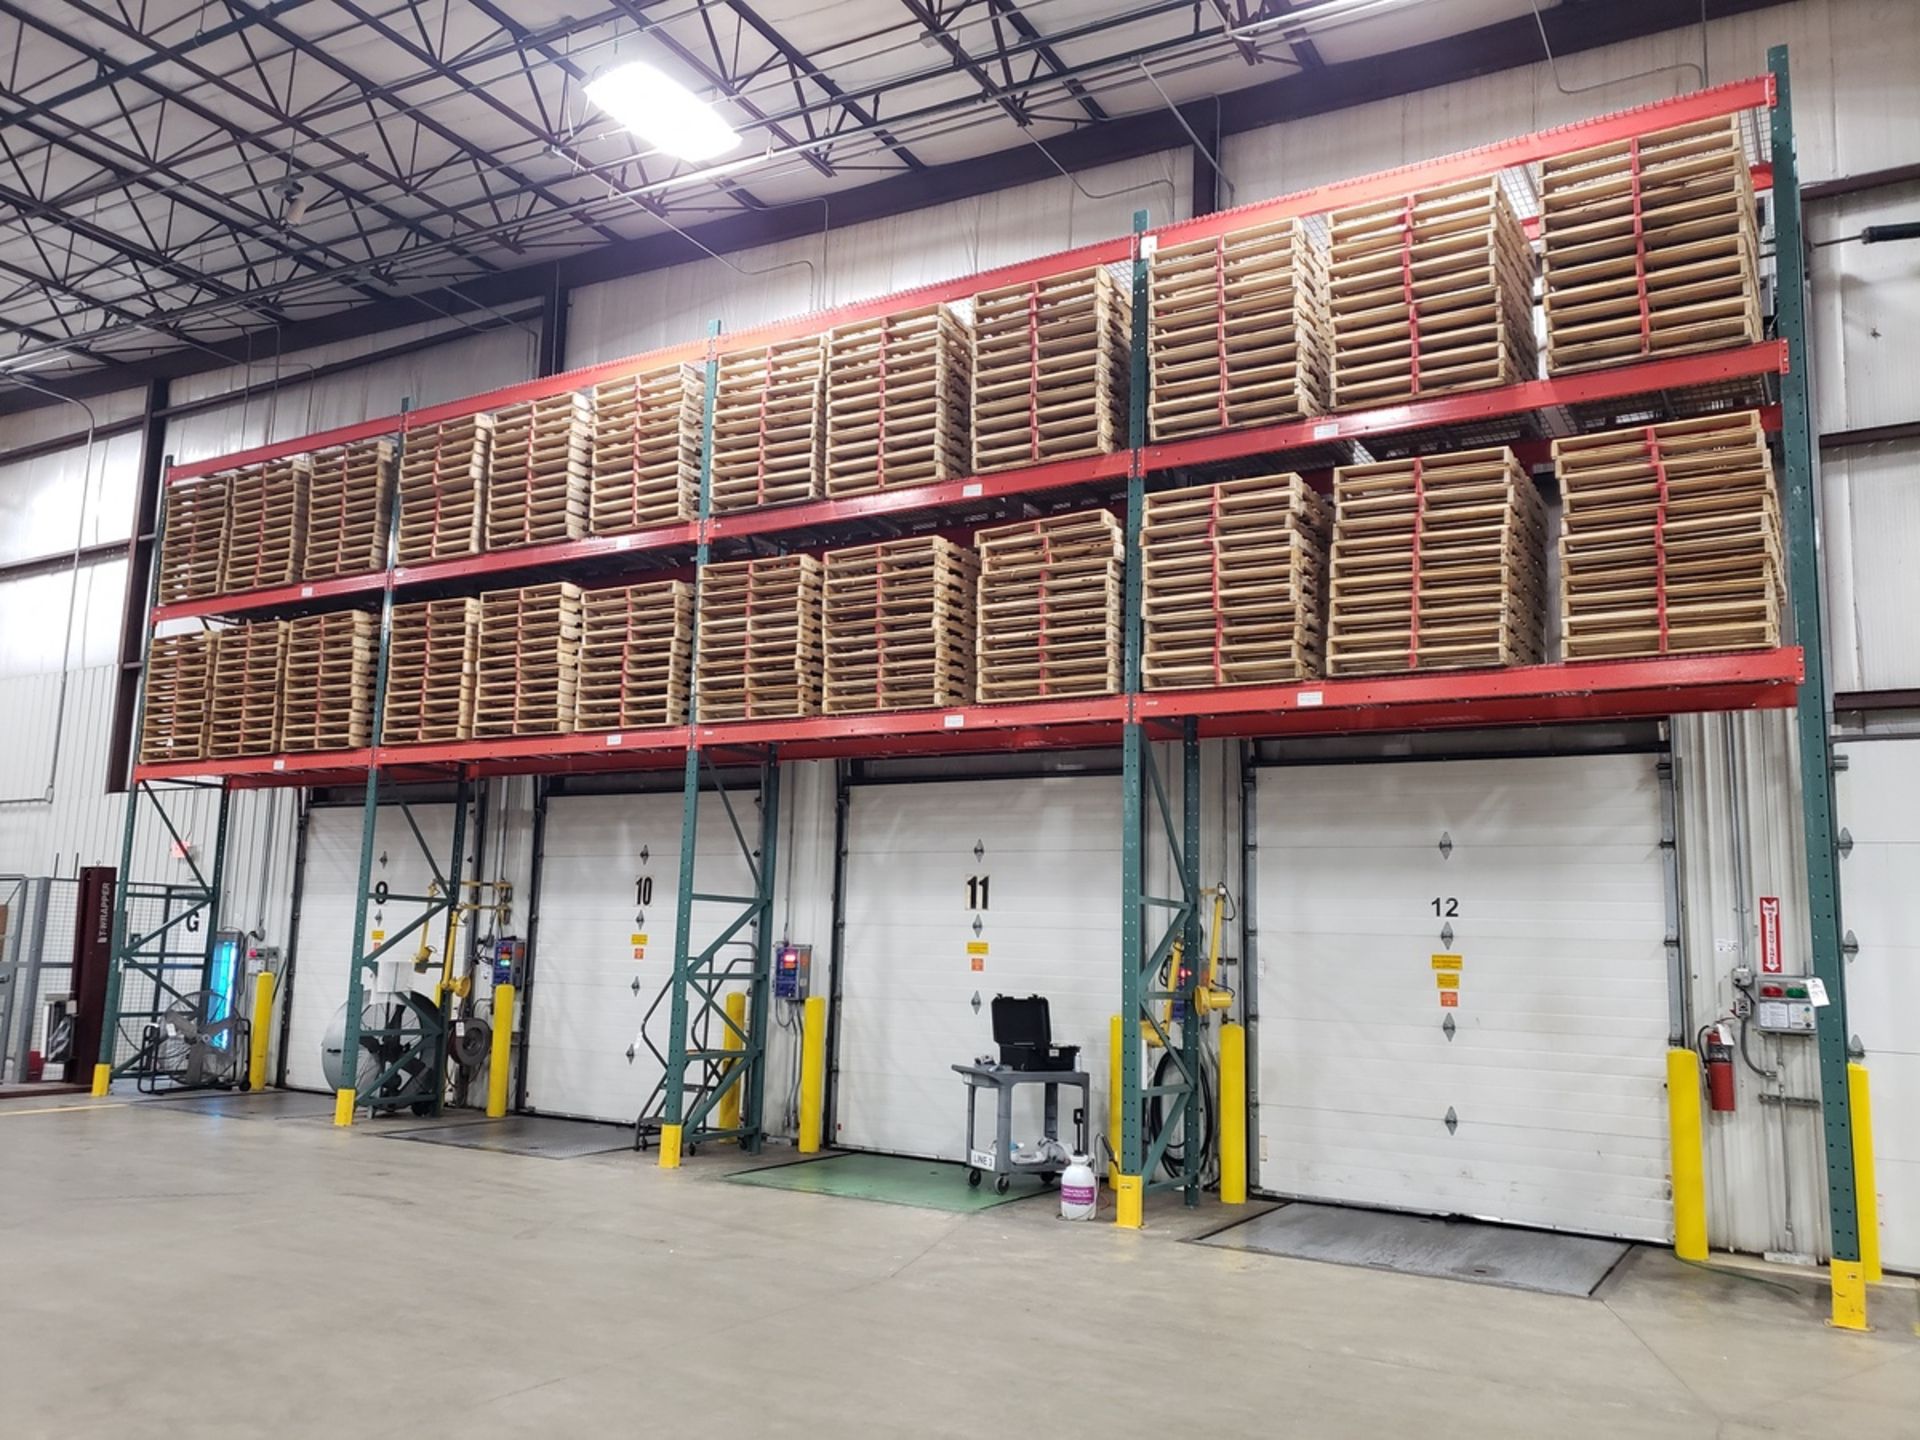 Lot of Pallet Rack, (5) Uprights 42'' x 20', (24) Beams 12', (36) Wire Decks (Approx | Rig Fee $600